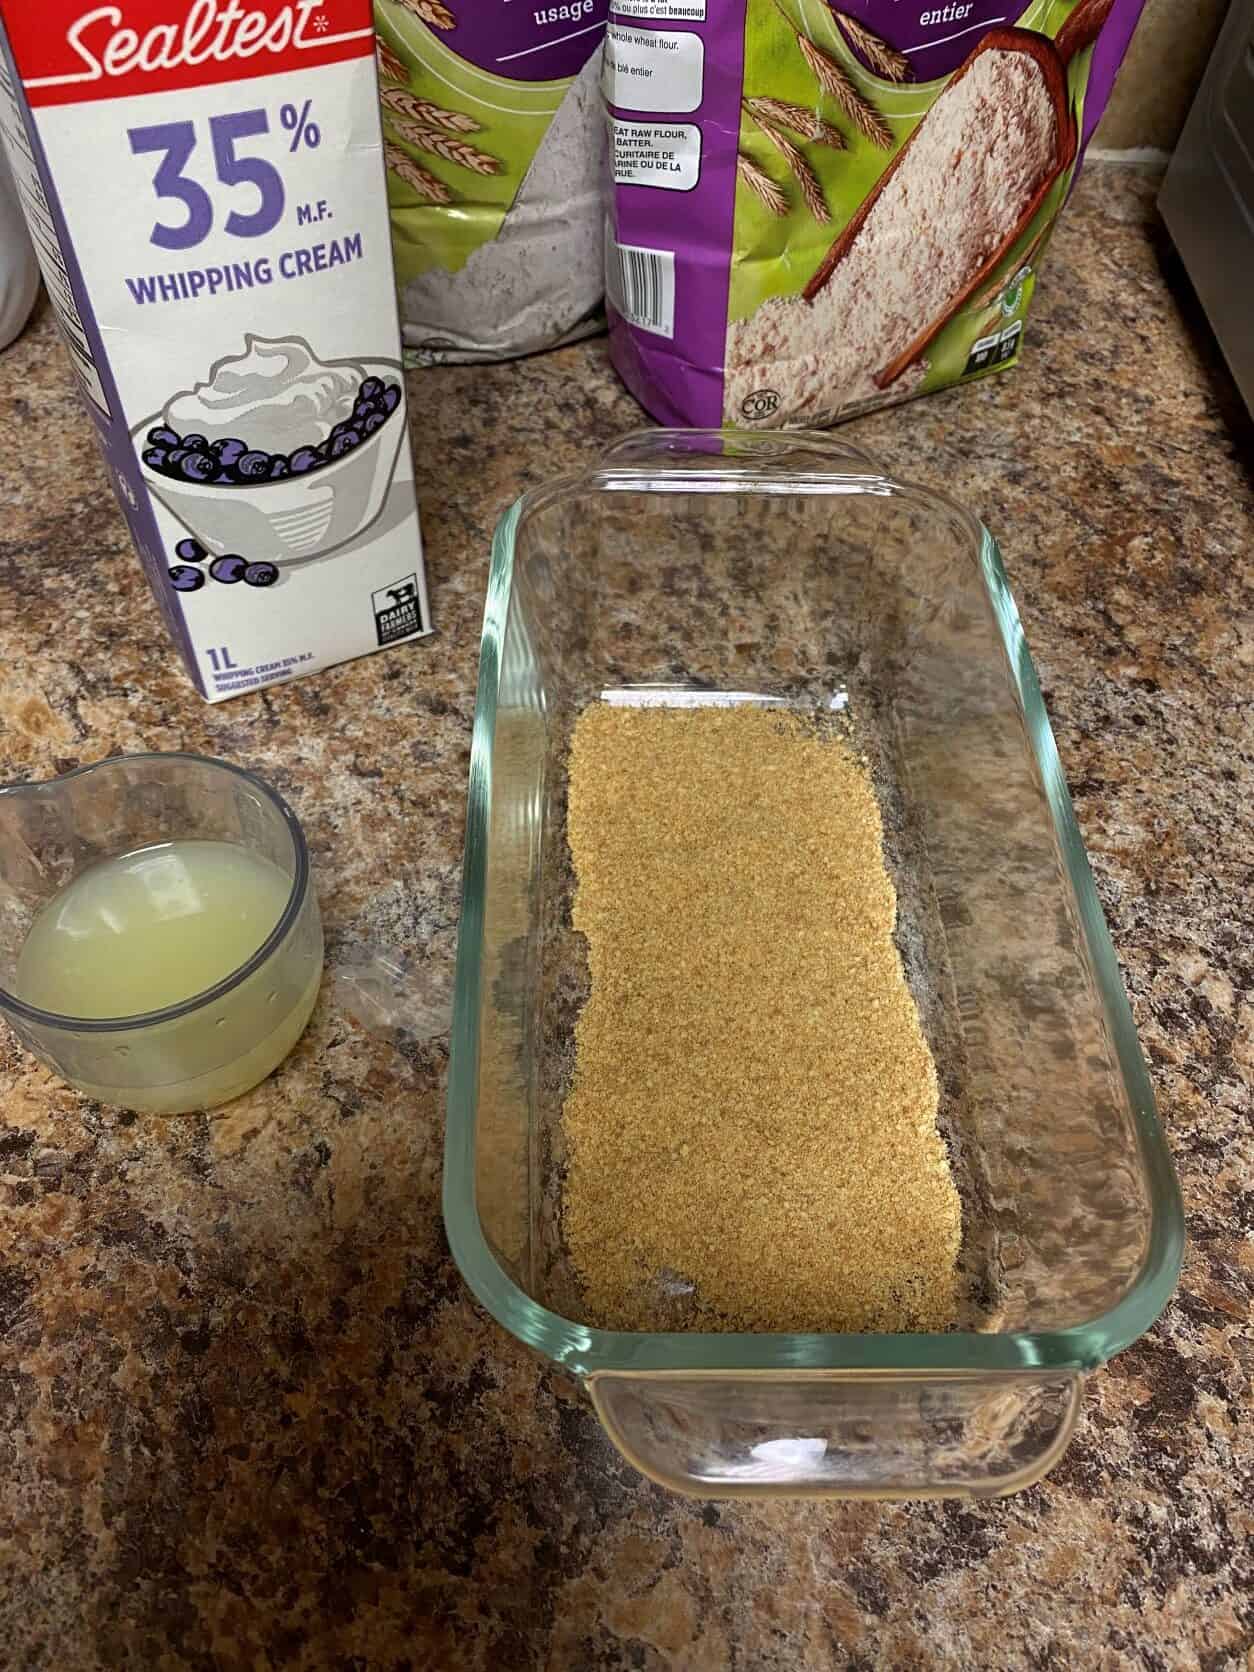 Graham crumbs in a loaf tray